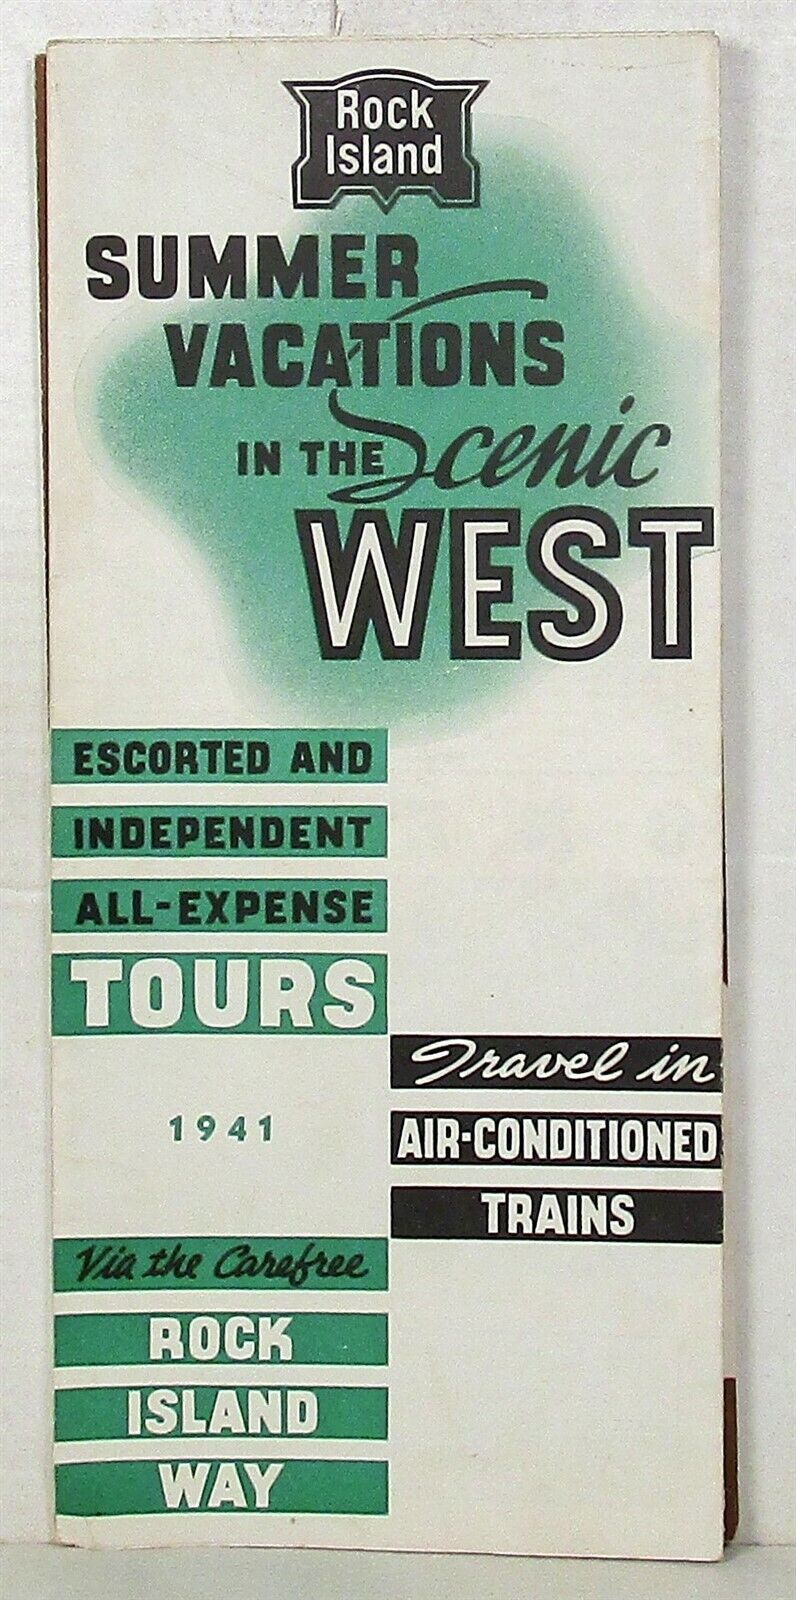 1941 Rock Island summer vacations in the scenic west brochure